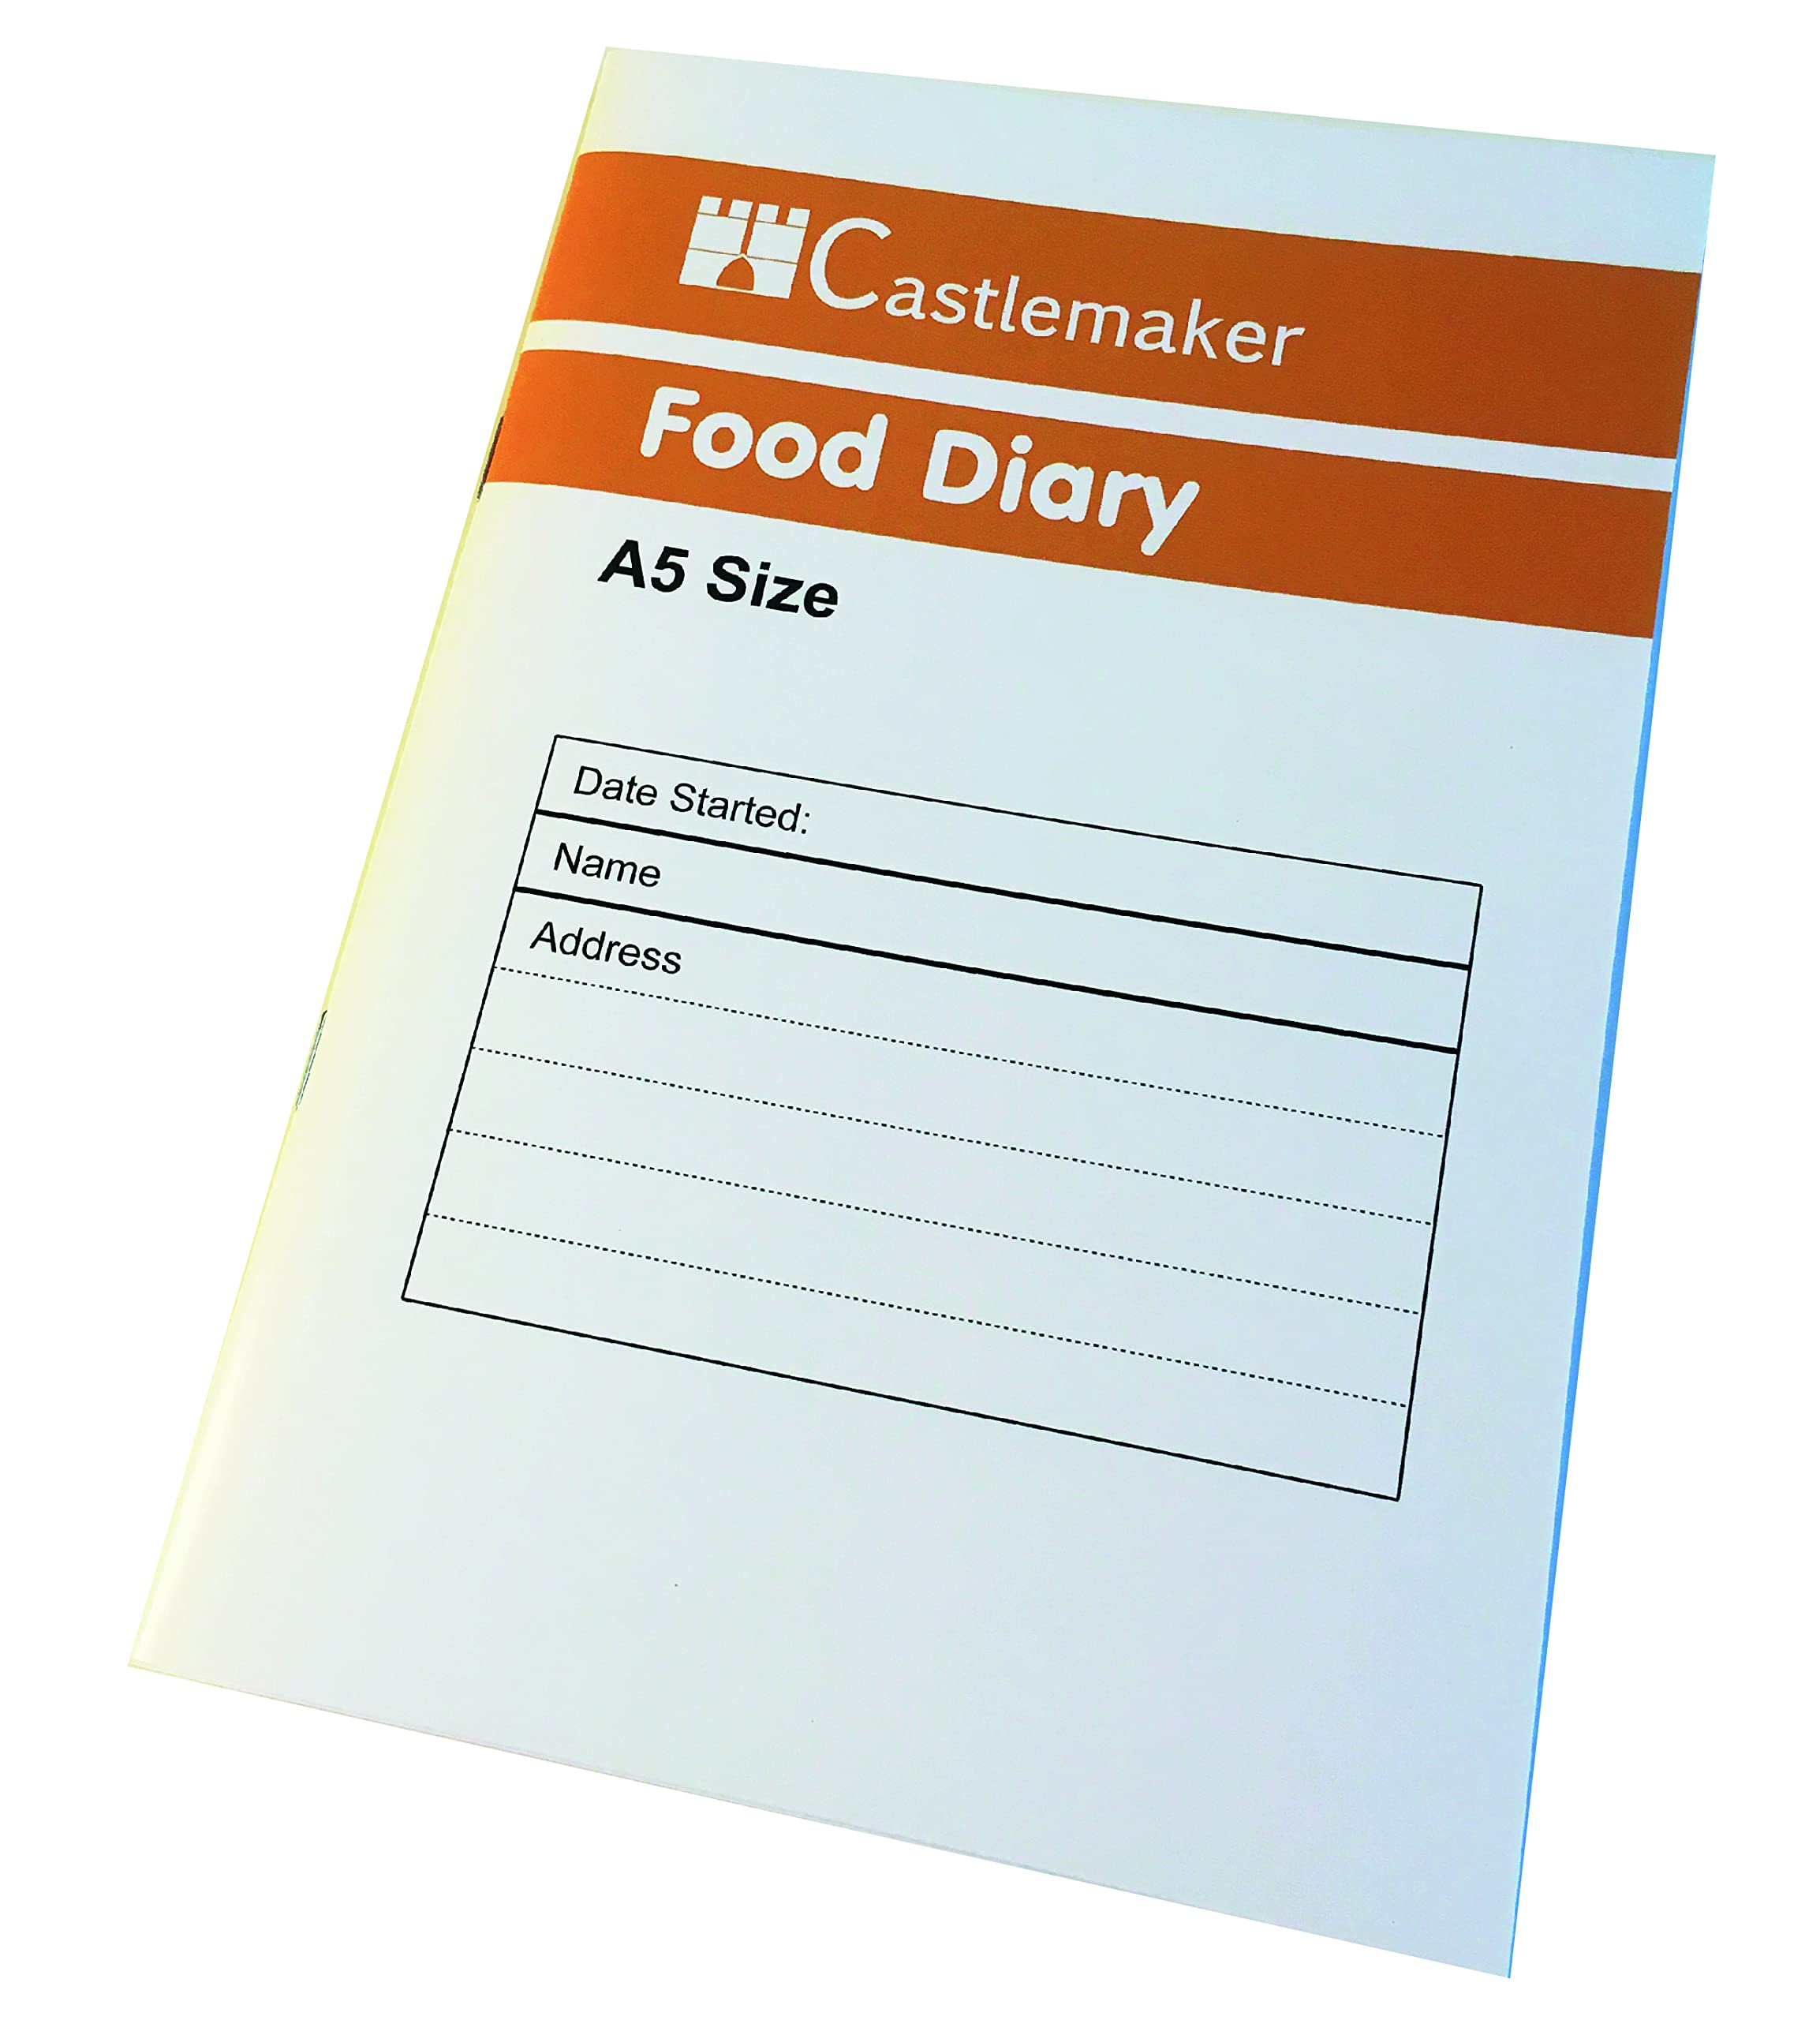 Food Diary - A5 Version - Castlemaker Books